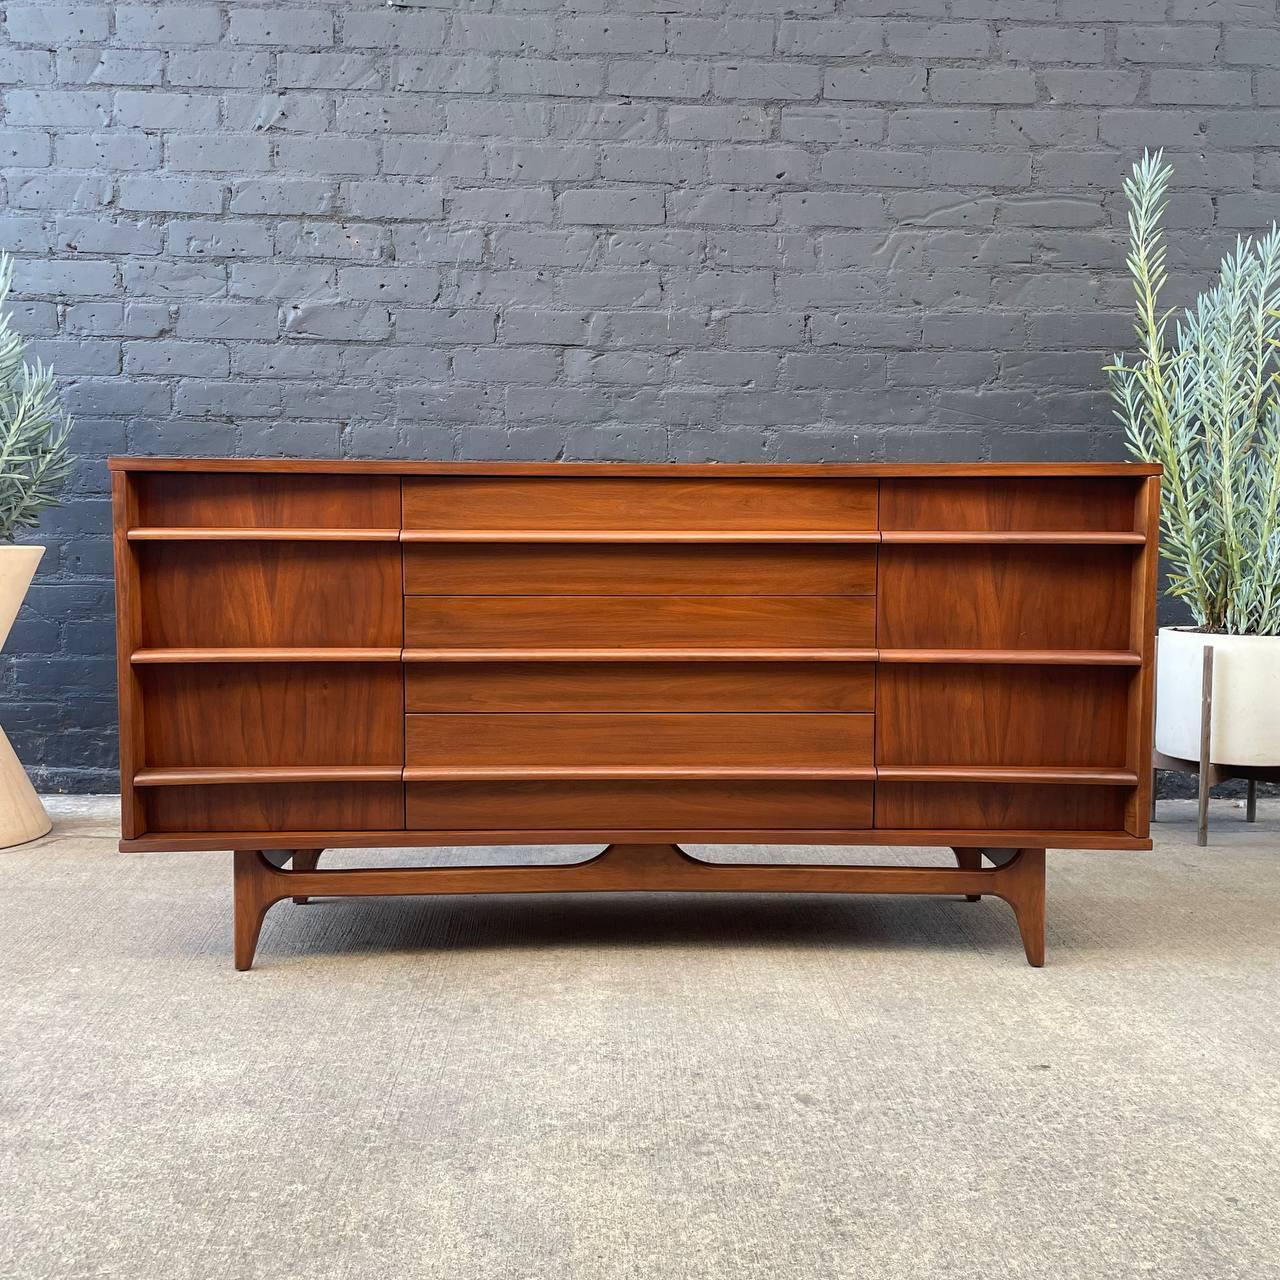 Newly Refinished - Mid-Century Modern Curved-Front Walnut Credenza

With over 15 years of experience, our workshop has followed a careful process of restoration, showcasing our passion and creativity for vintage designs that can seamlessly be